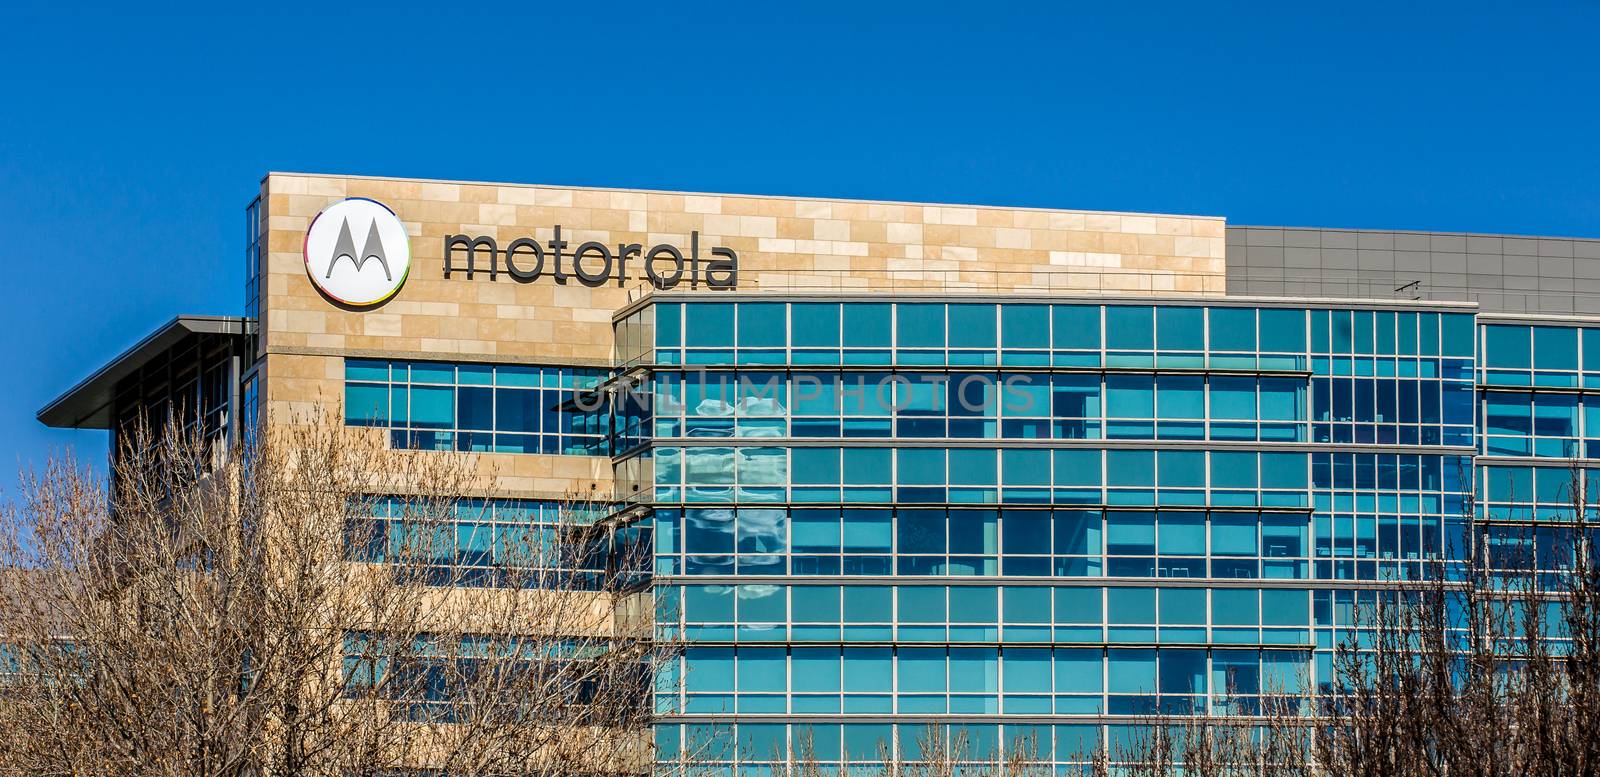 SANTA CLARA,CA/USA - FEBRUARY 1, 2014: Motorola headquarters in Silicon Valley. Motorola is a technology and telecommunications company owned by Google.